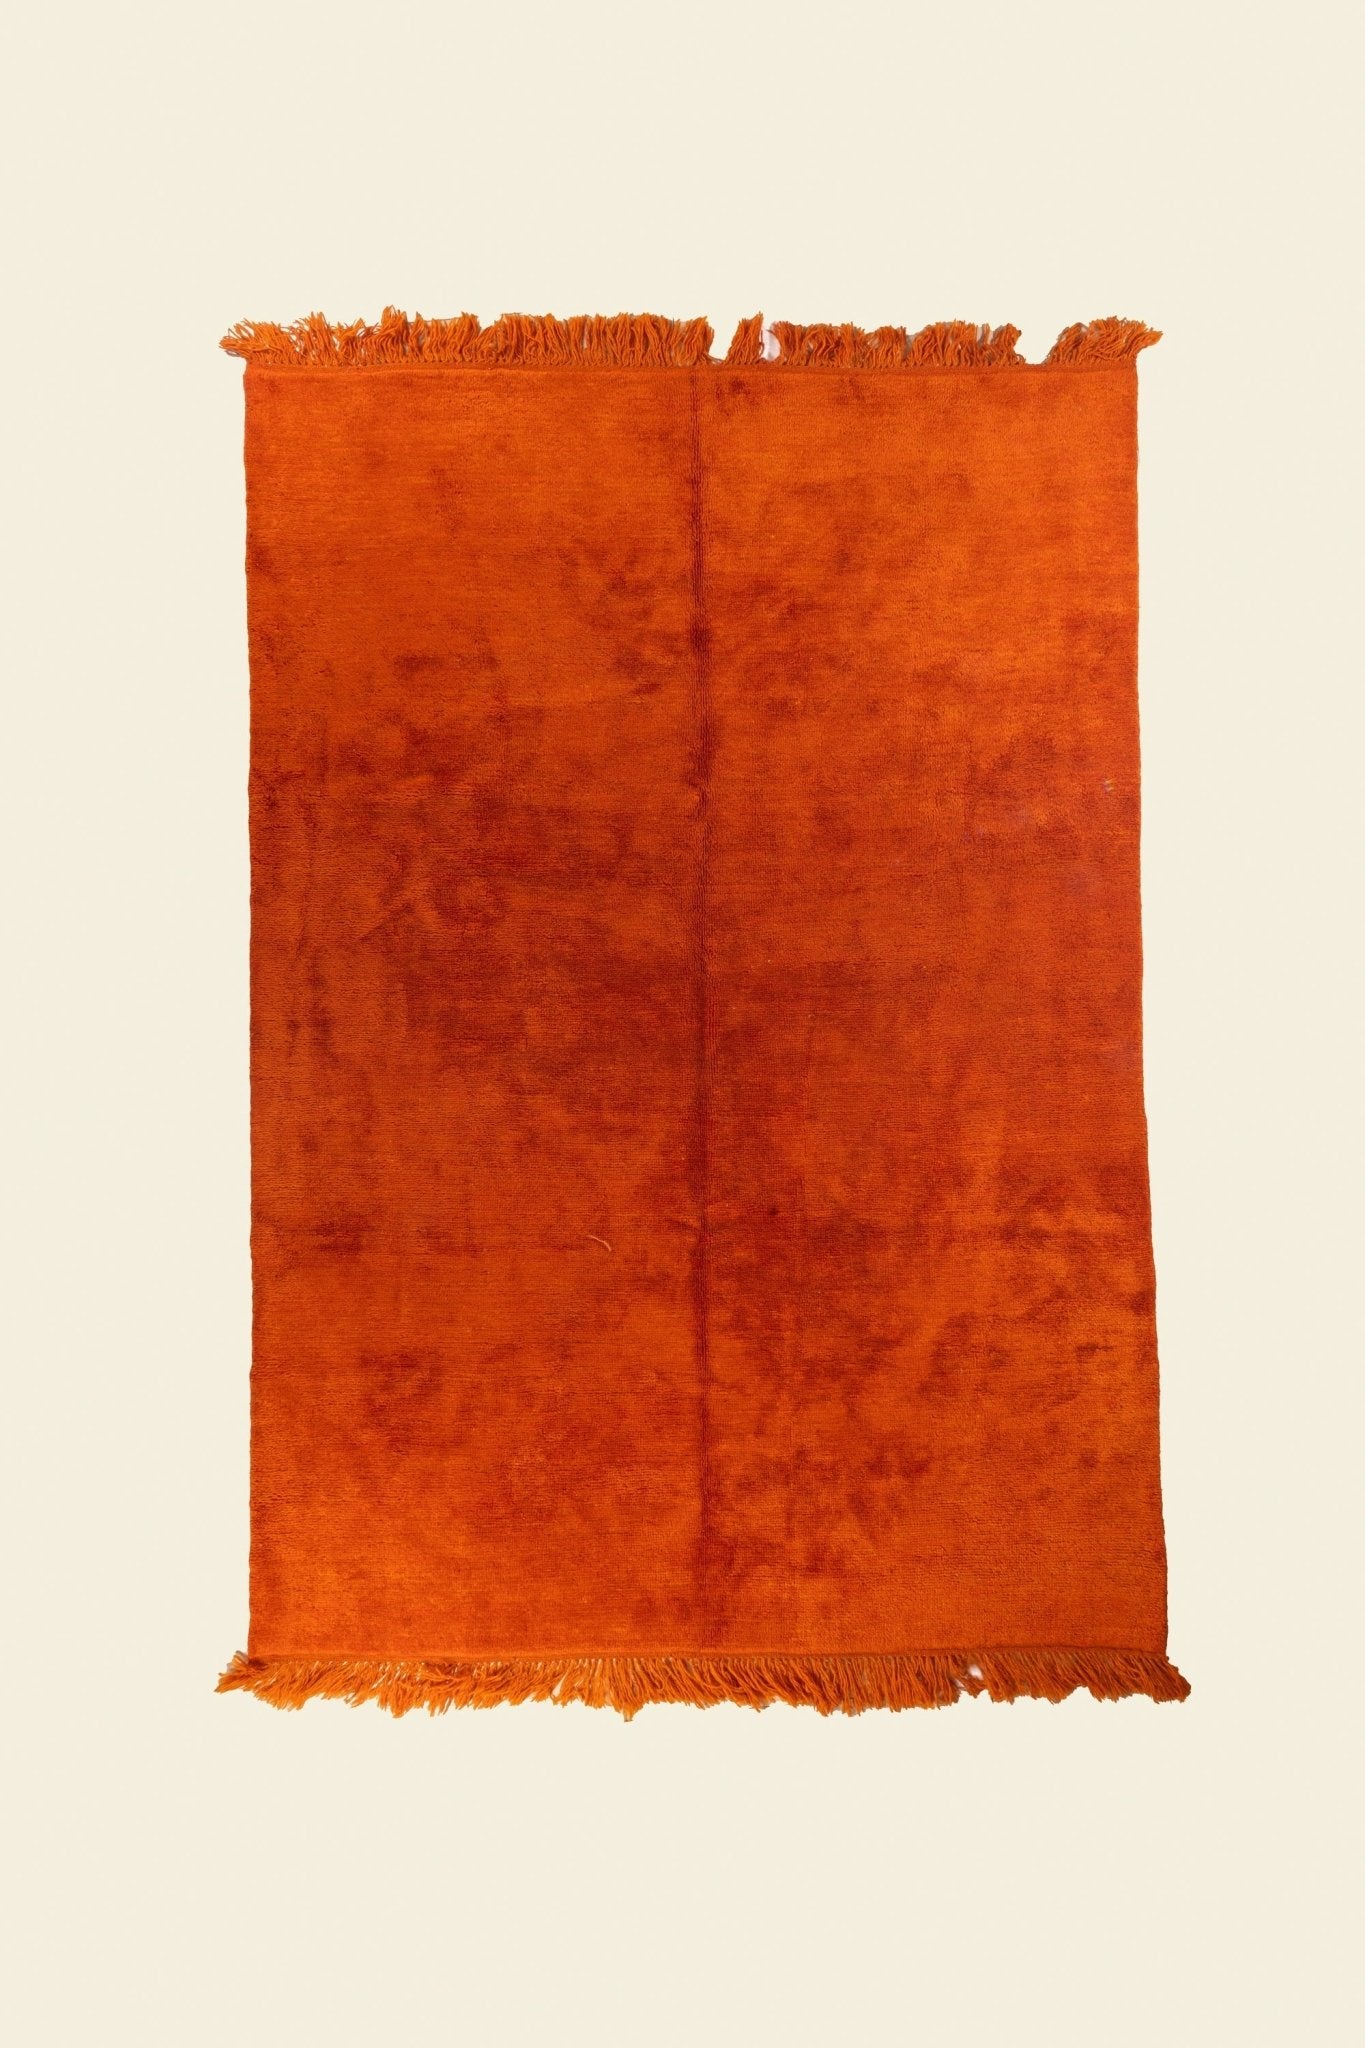 Vibrant Hand-Knotted Orange Rug: Add a Pop of Color to Your Space - Dar Bouchaib Marrakech